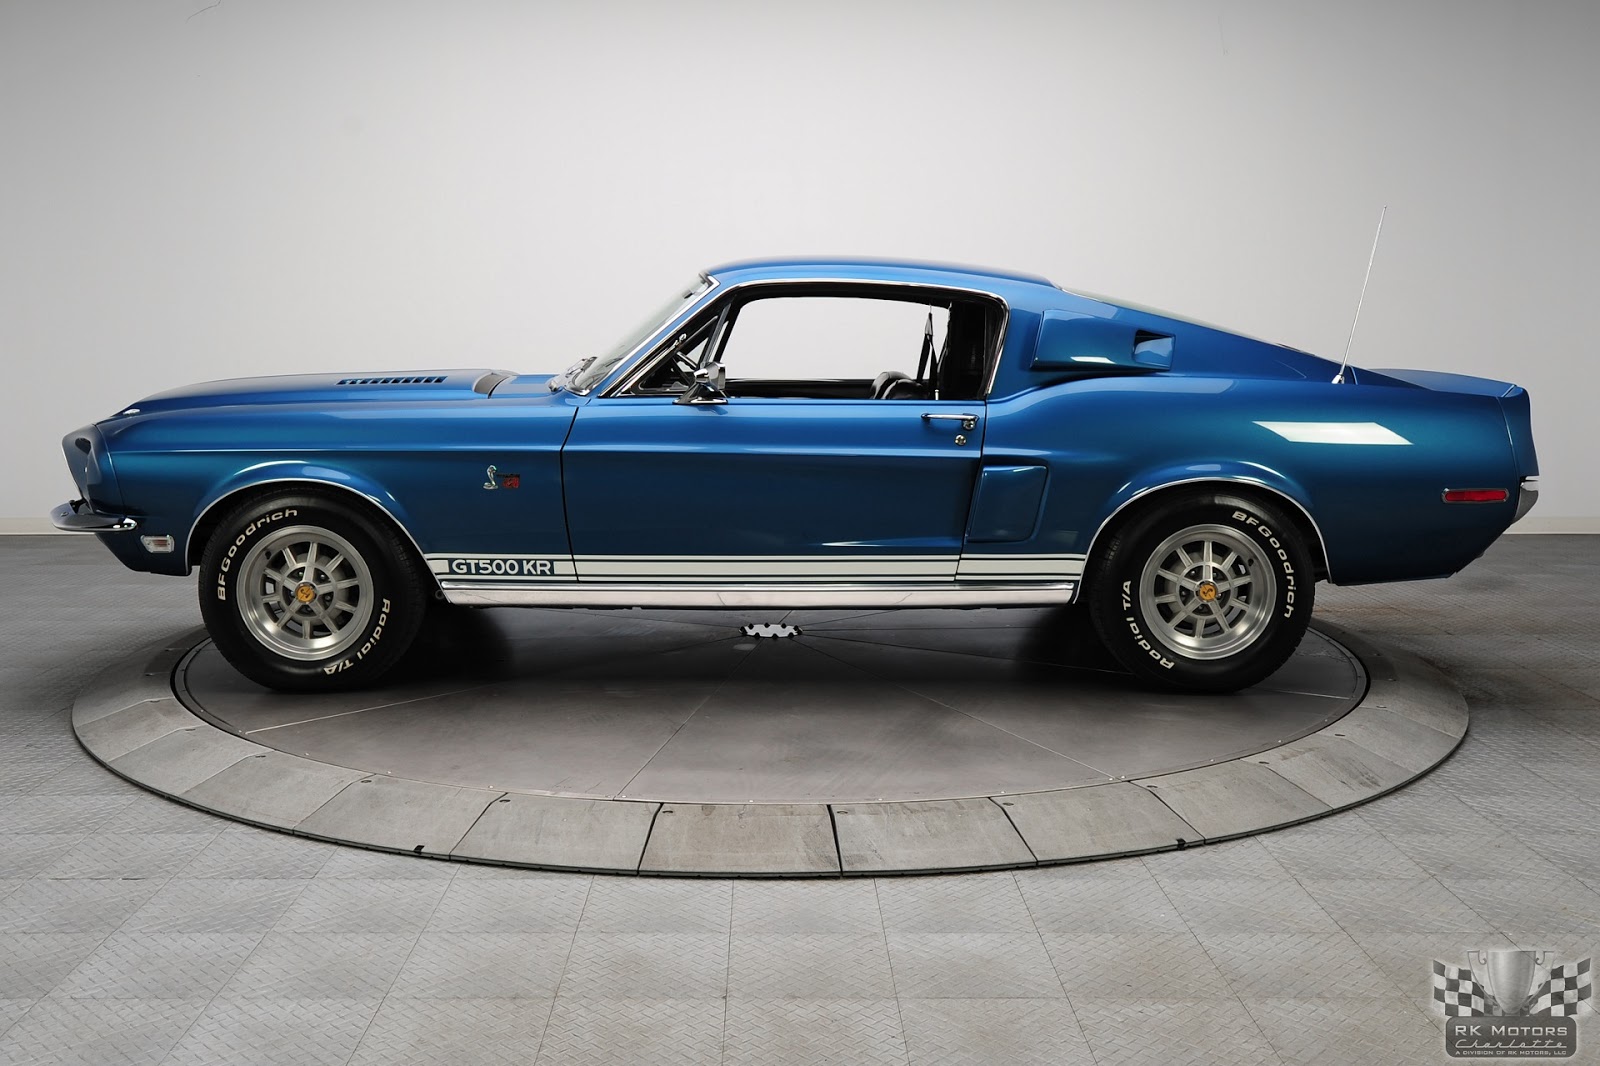 1968 Ford mustang shelby gt500kr #7